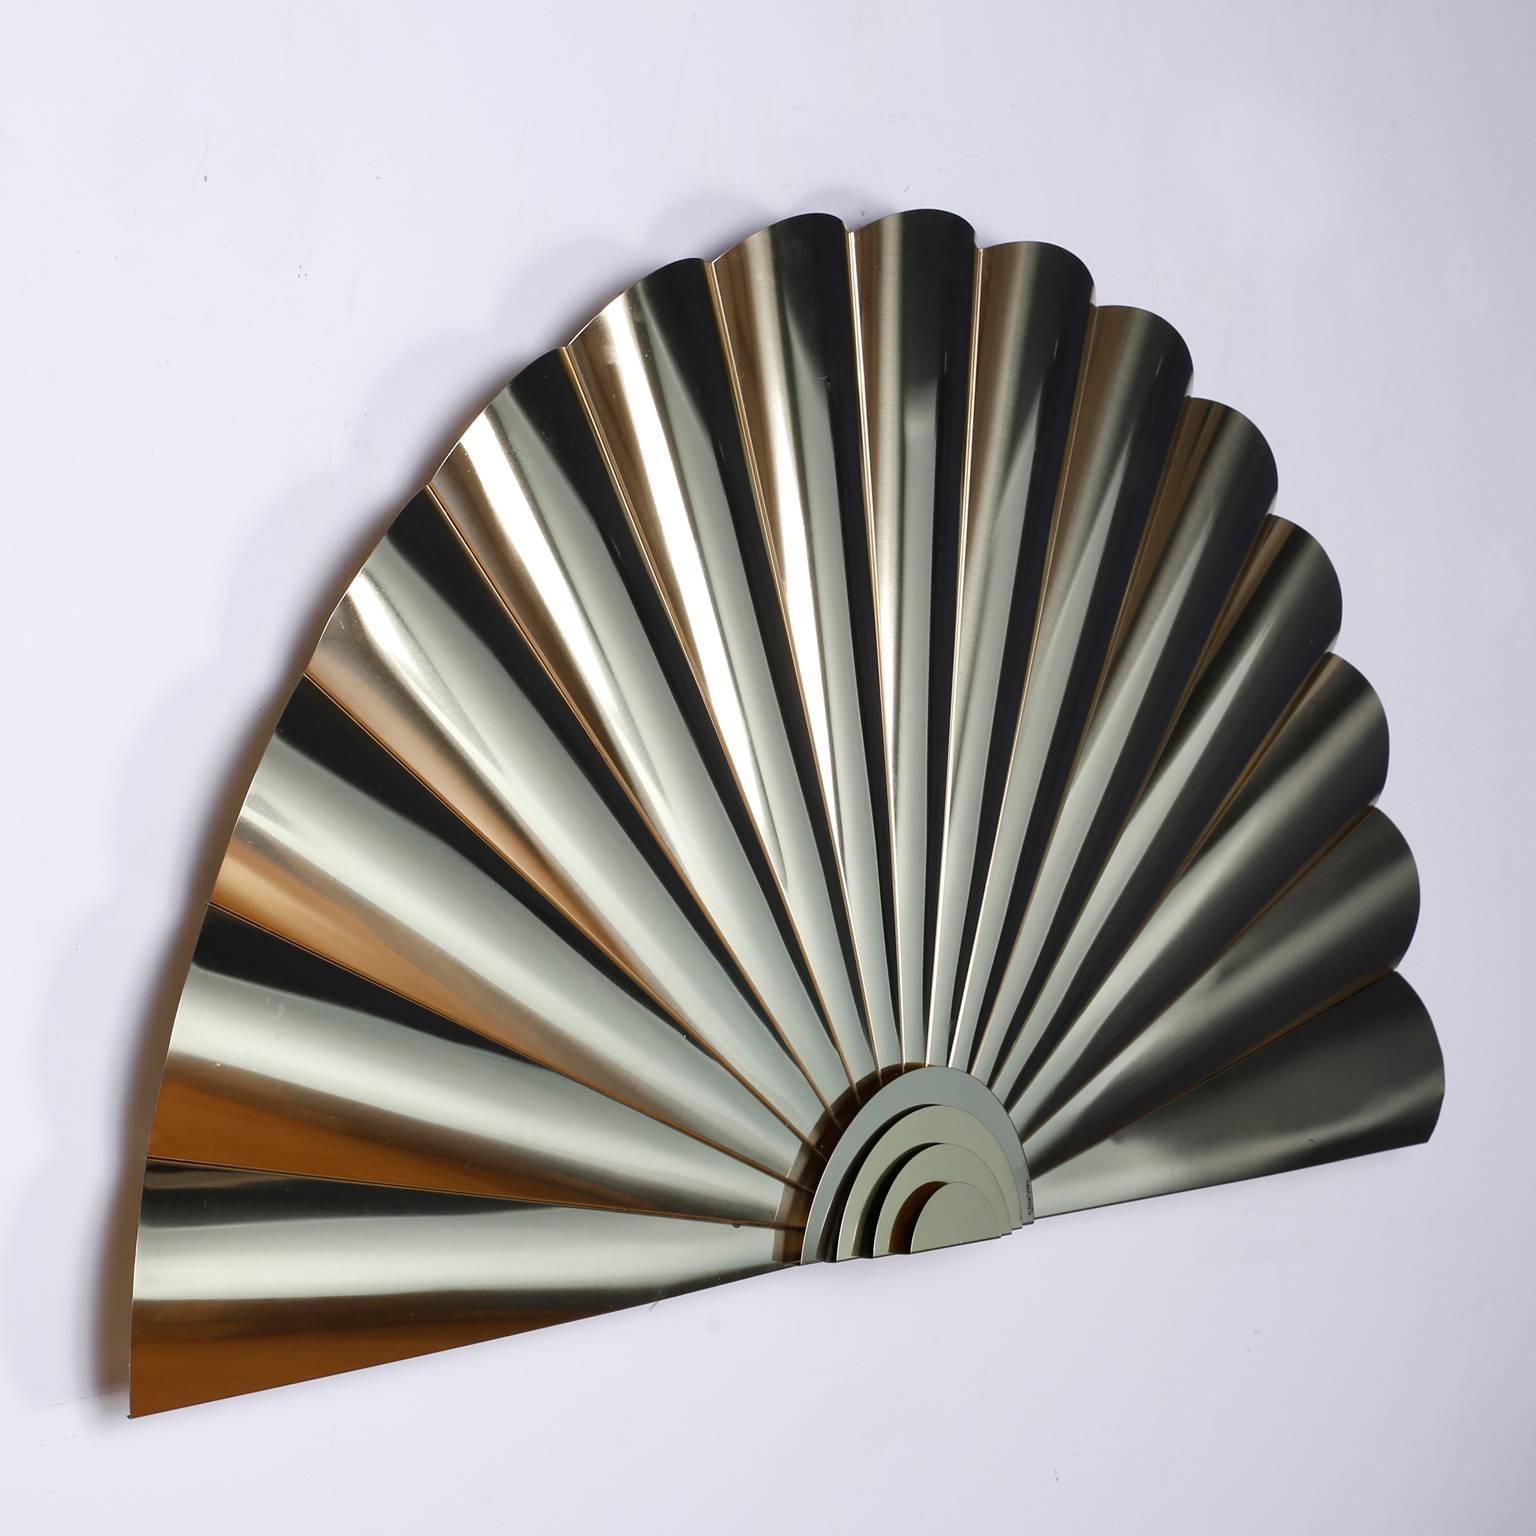 20th Century Midcentury C. Jere Wall Sculpture For Sale